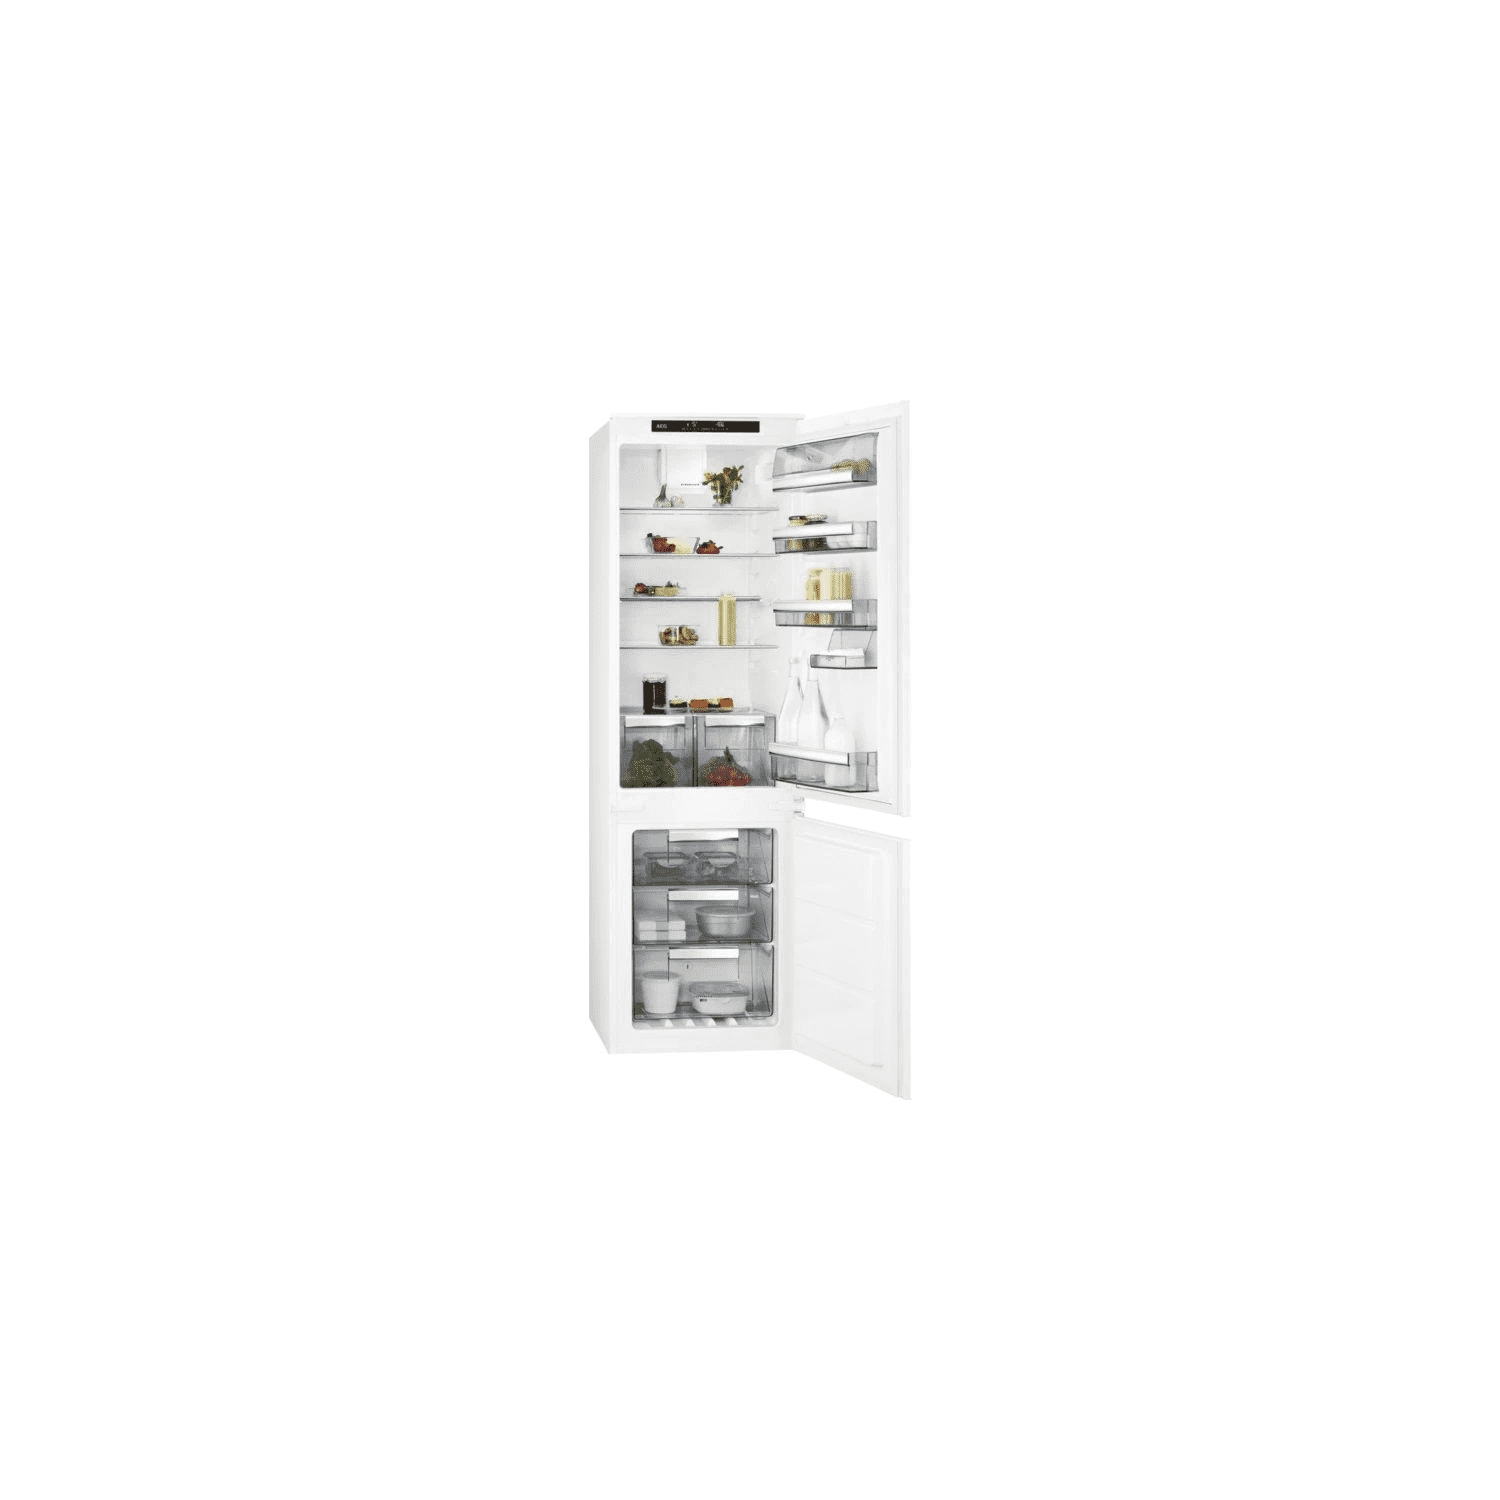 AEG SCE818F6TS Integrated Frost Free Fridge Freezer with Sliding Door Fixing Kit - White - F Rated - 0